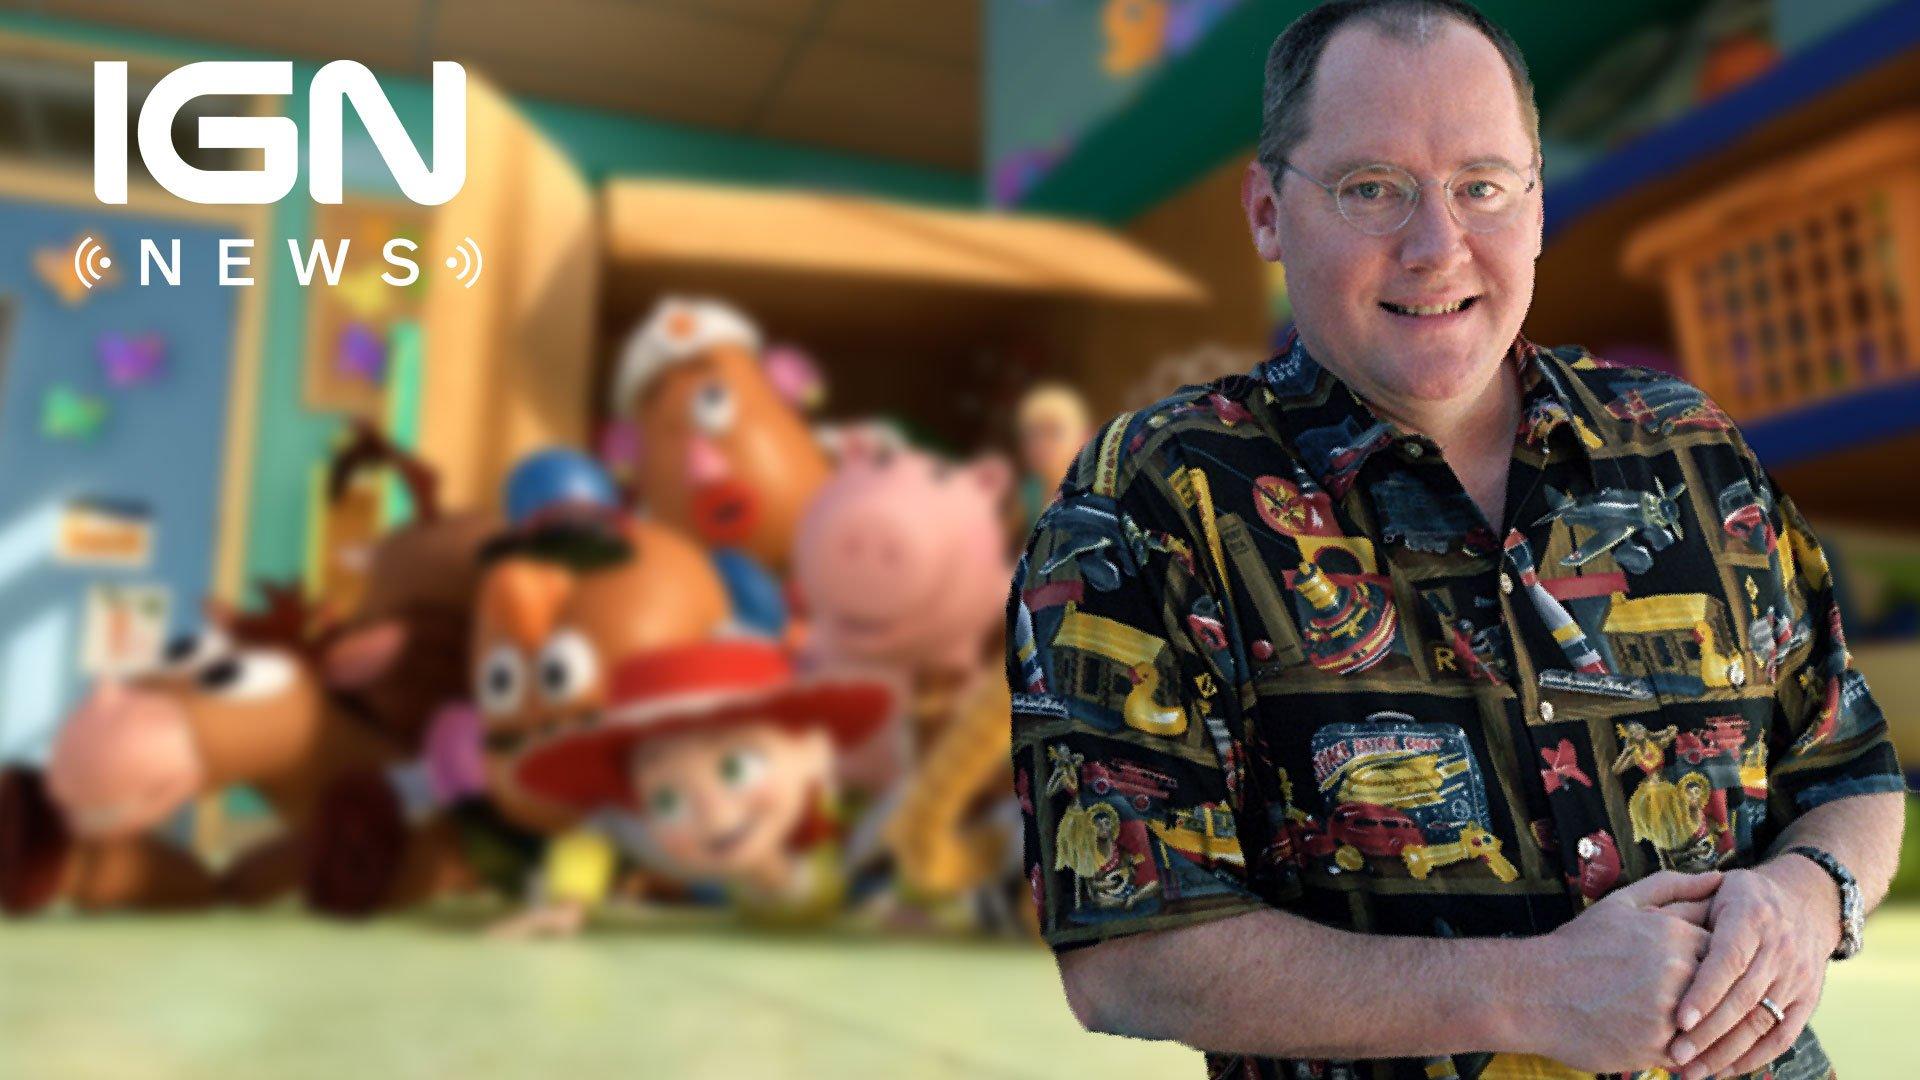 John Lasseter Takes Leave of Absence from Pixar.com